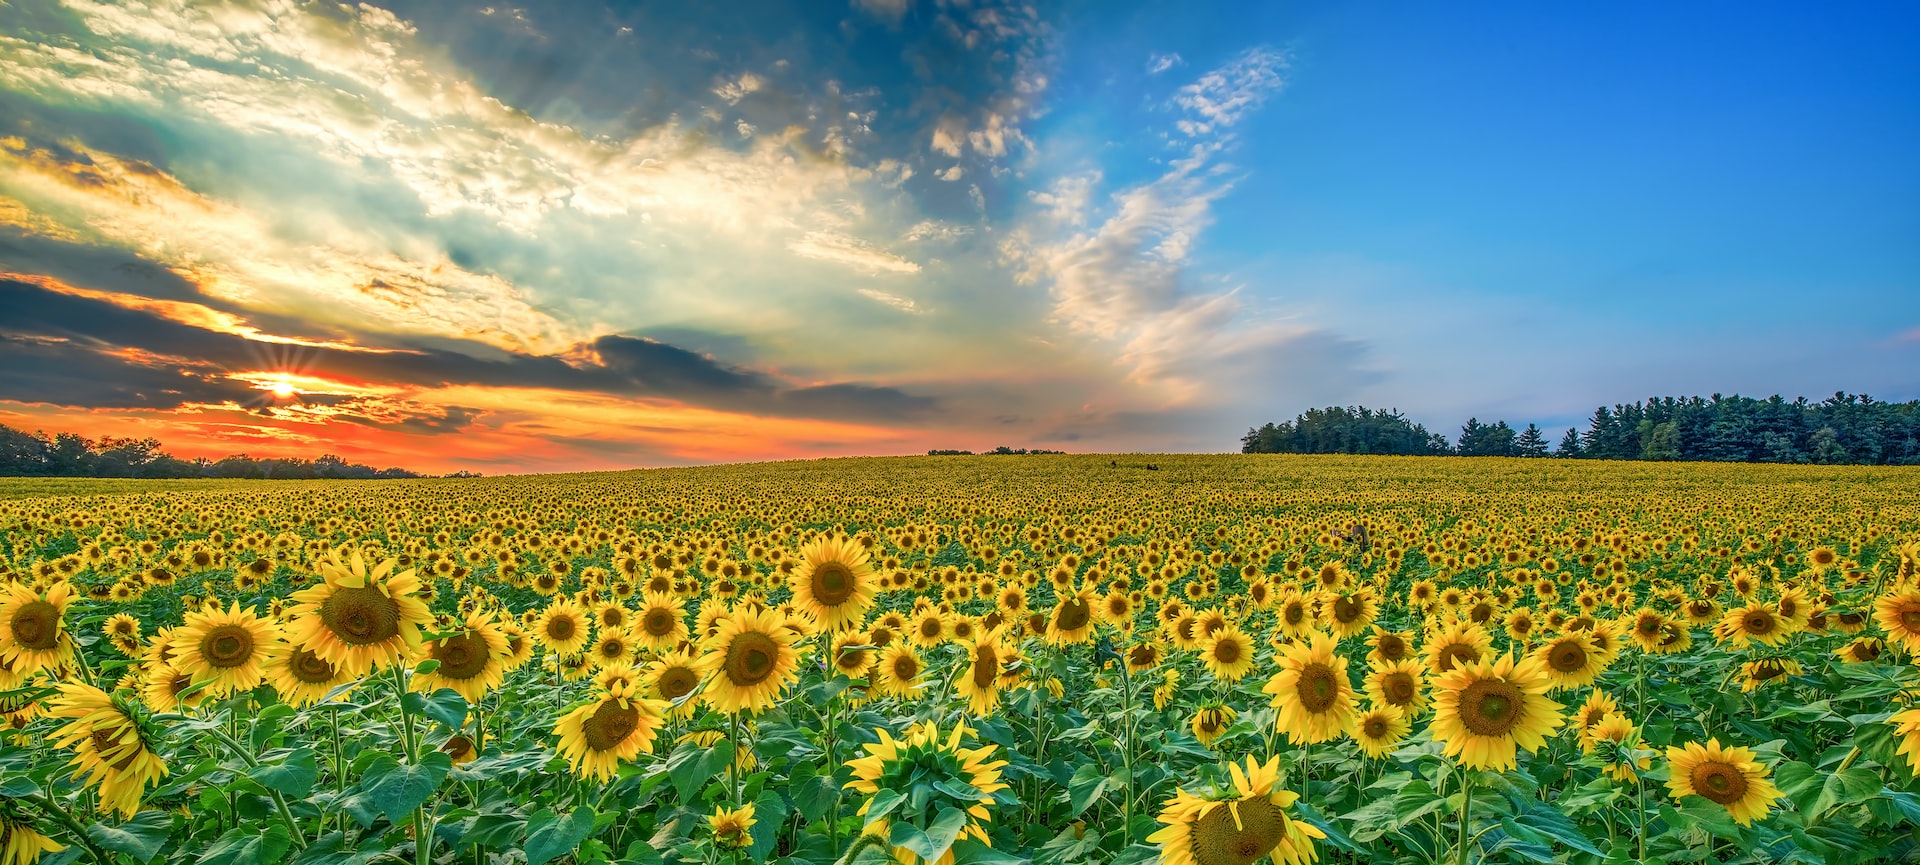 large meadow of sunflowers